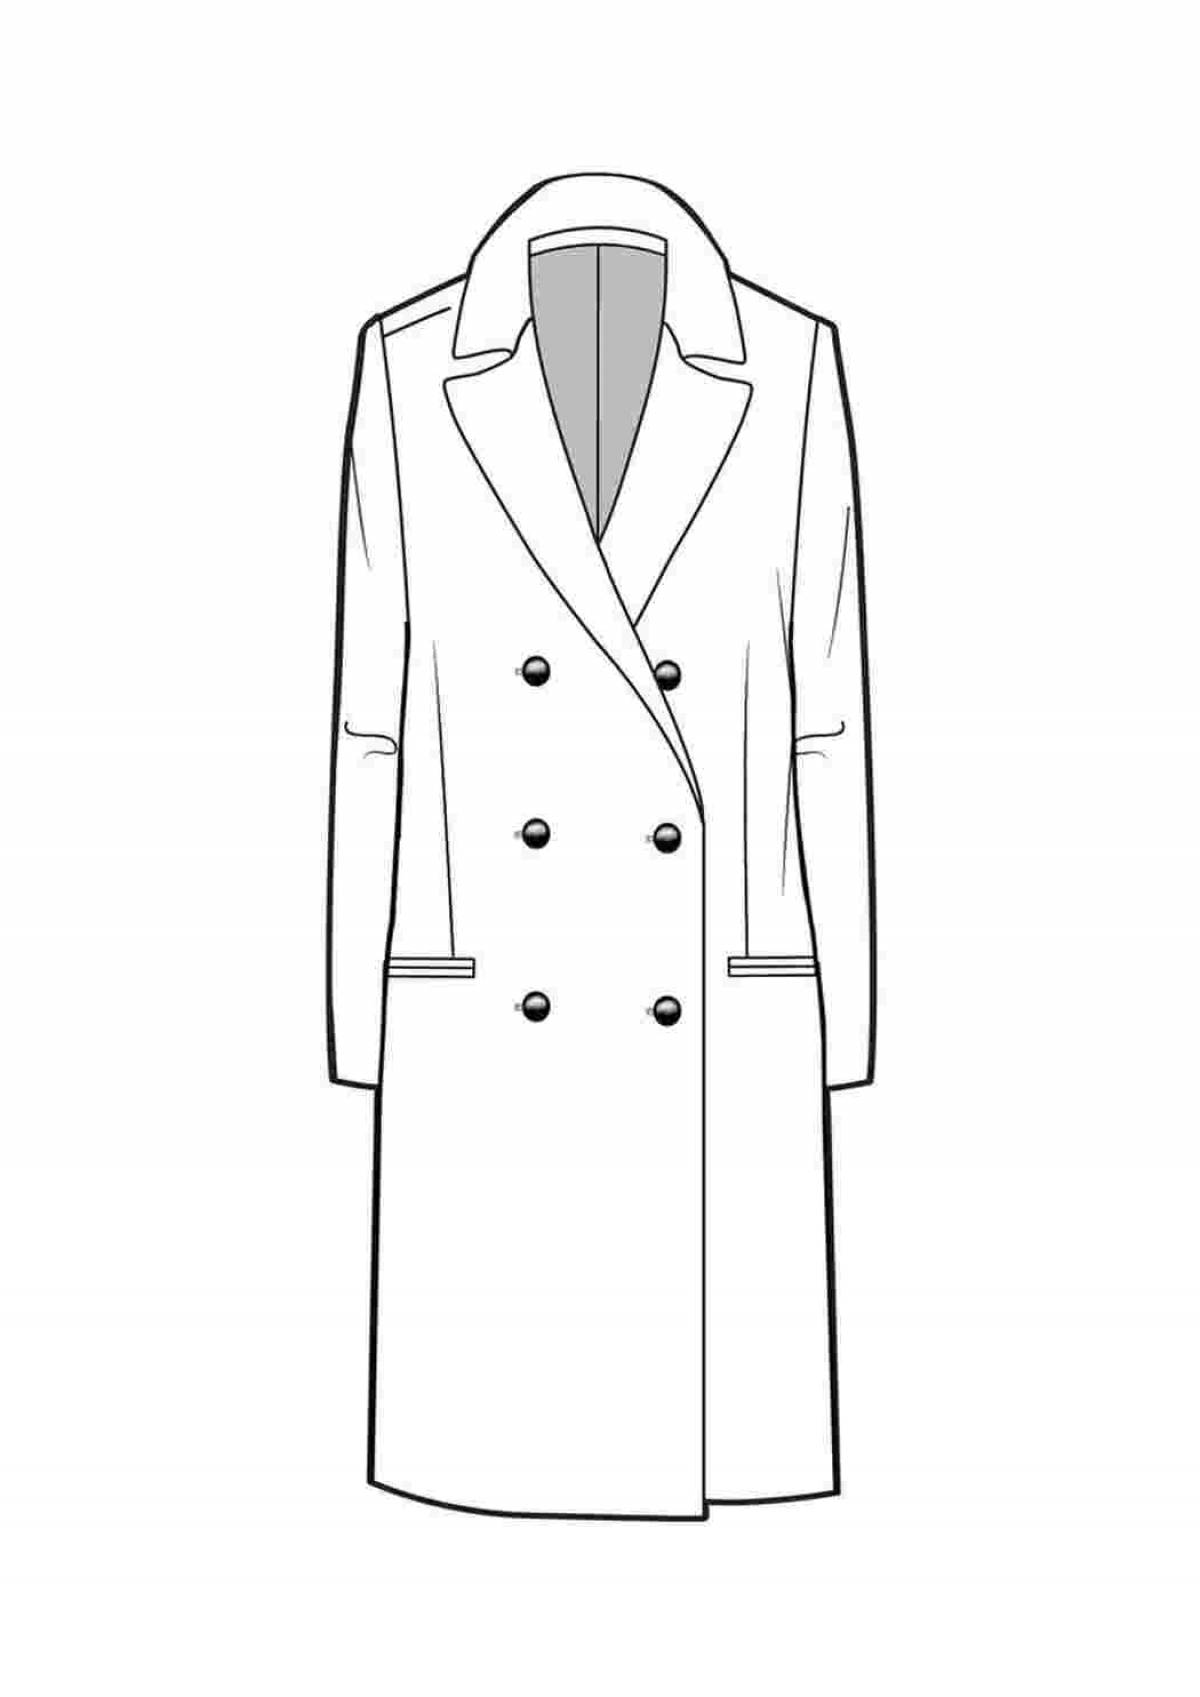 Coloring page with spectacular coat